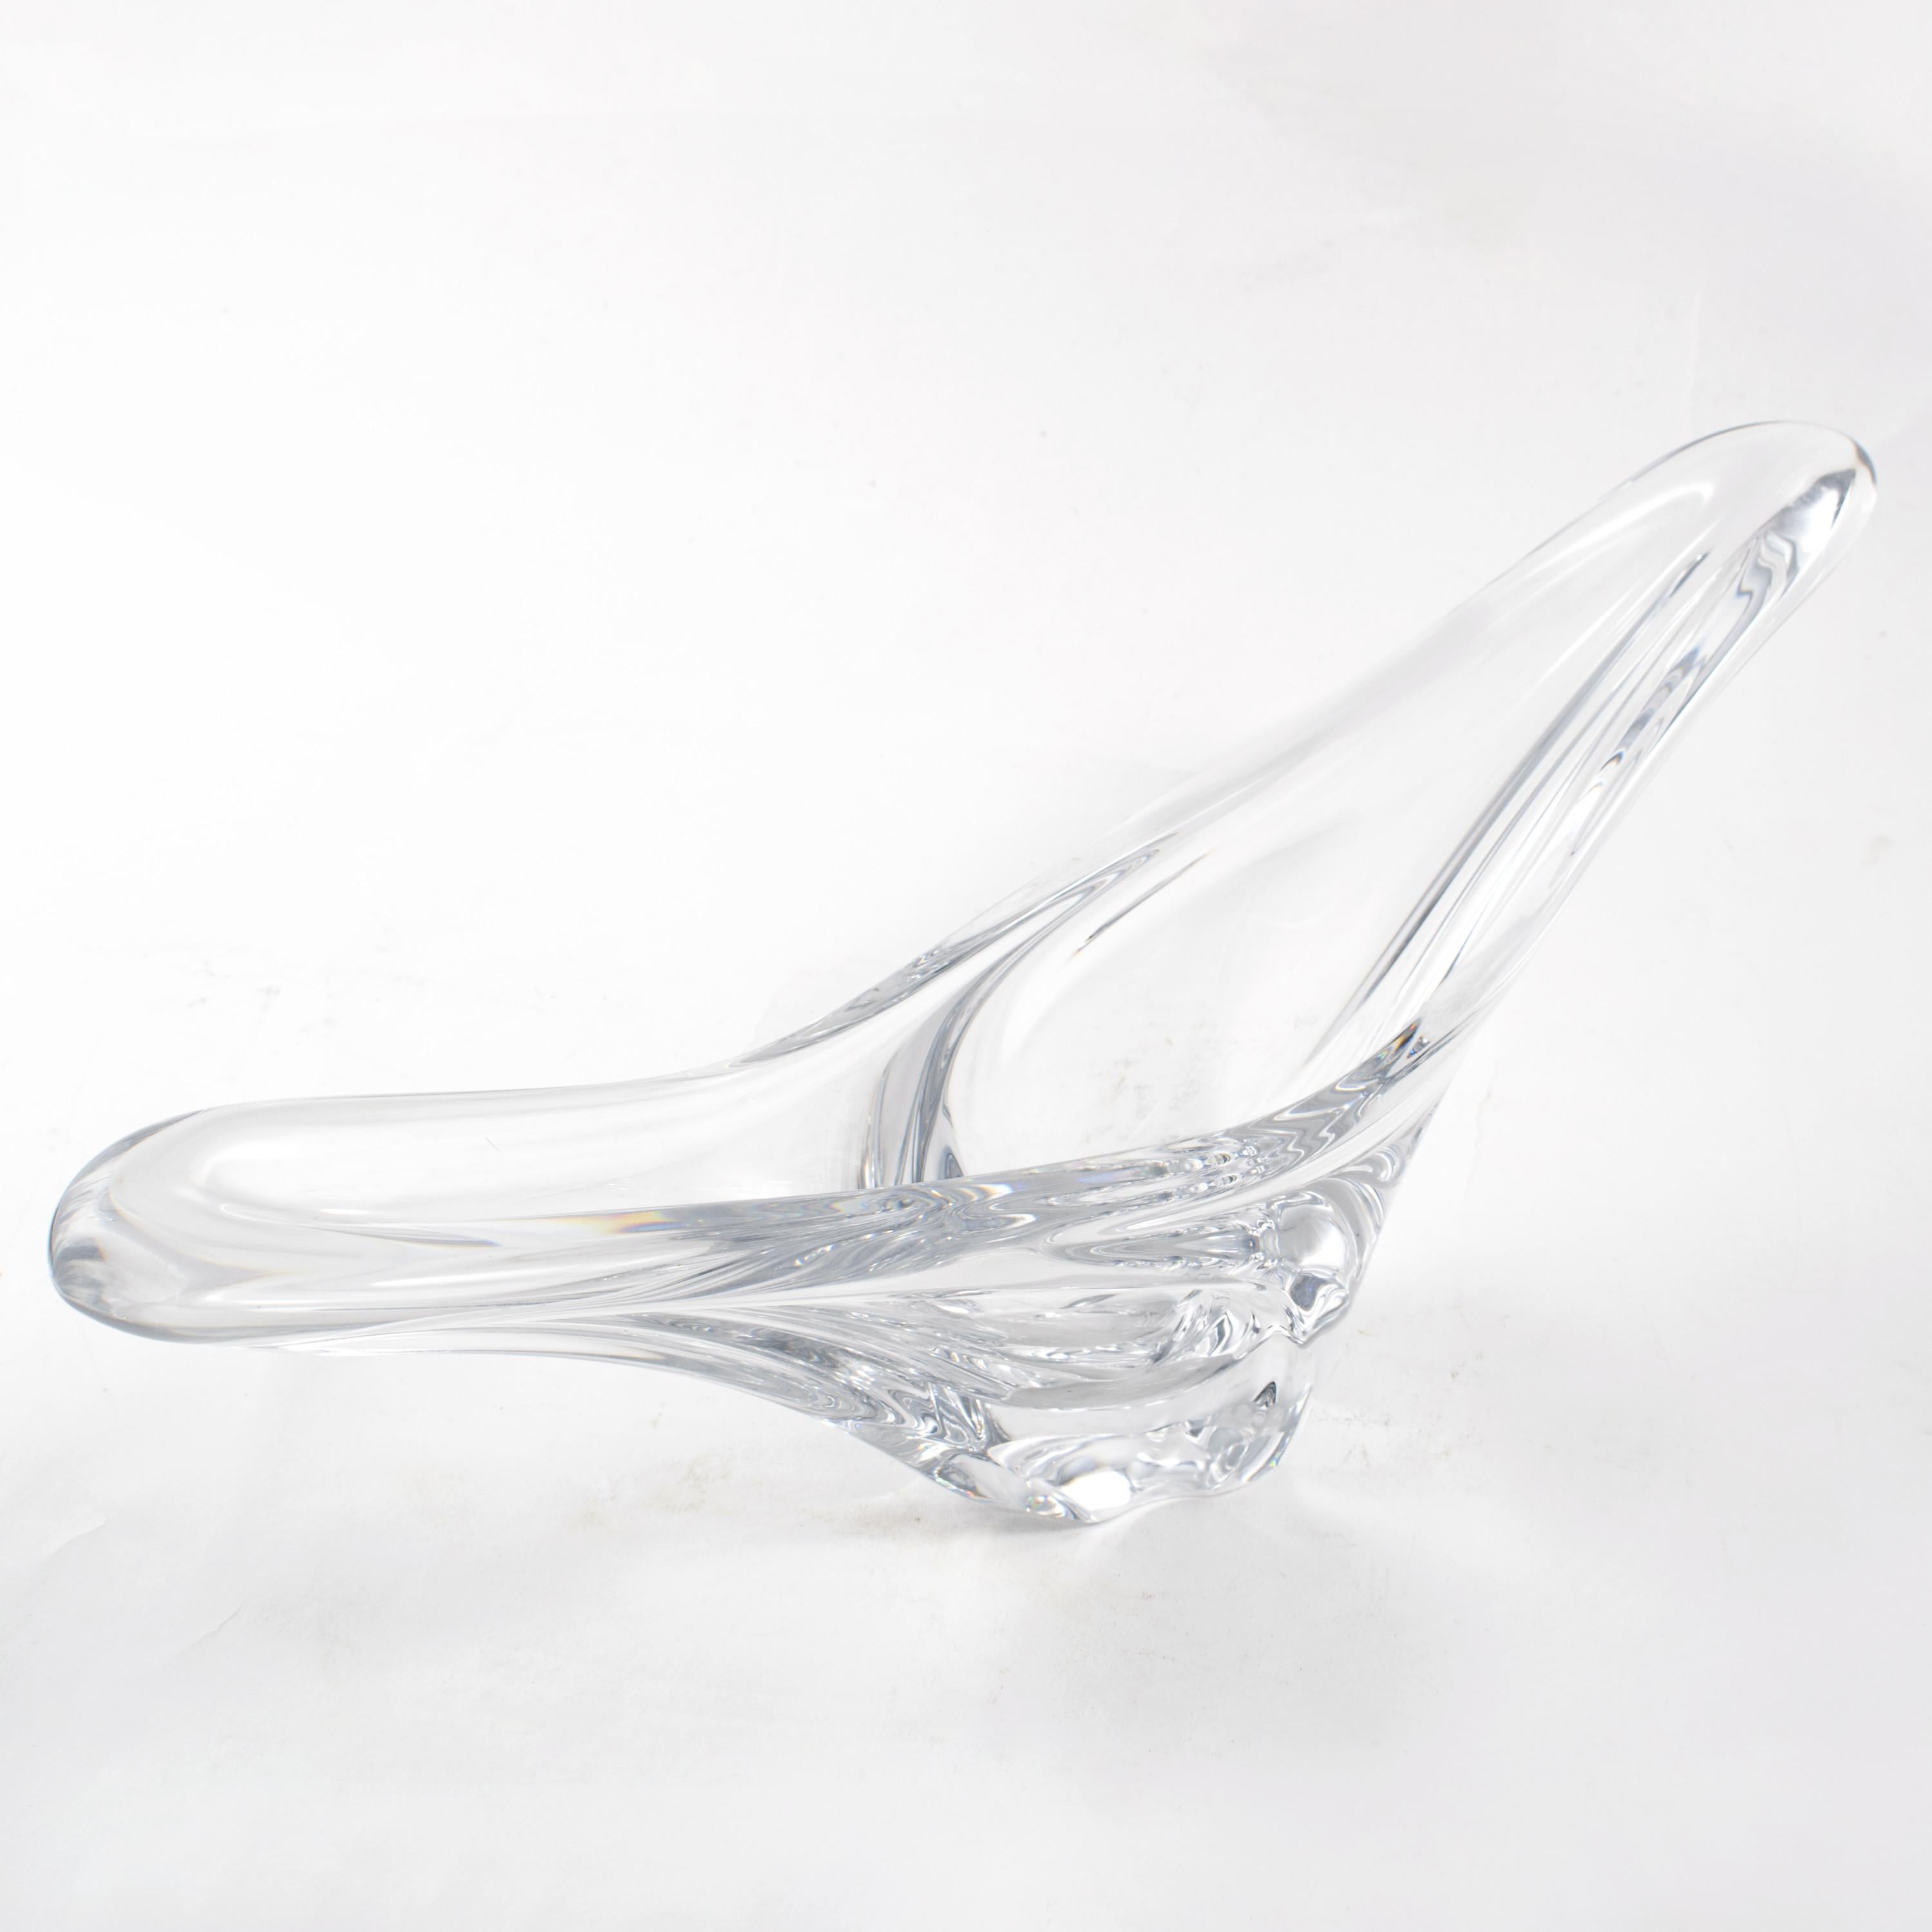 Sculptural translucent glass bowl produced by Daum, France.
It is signed 